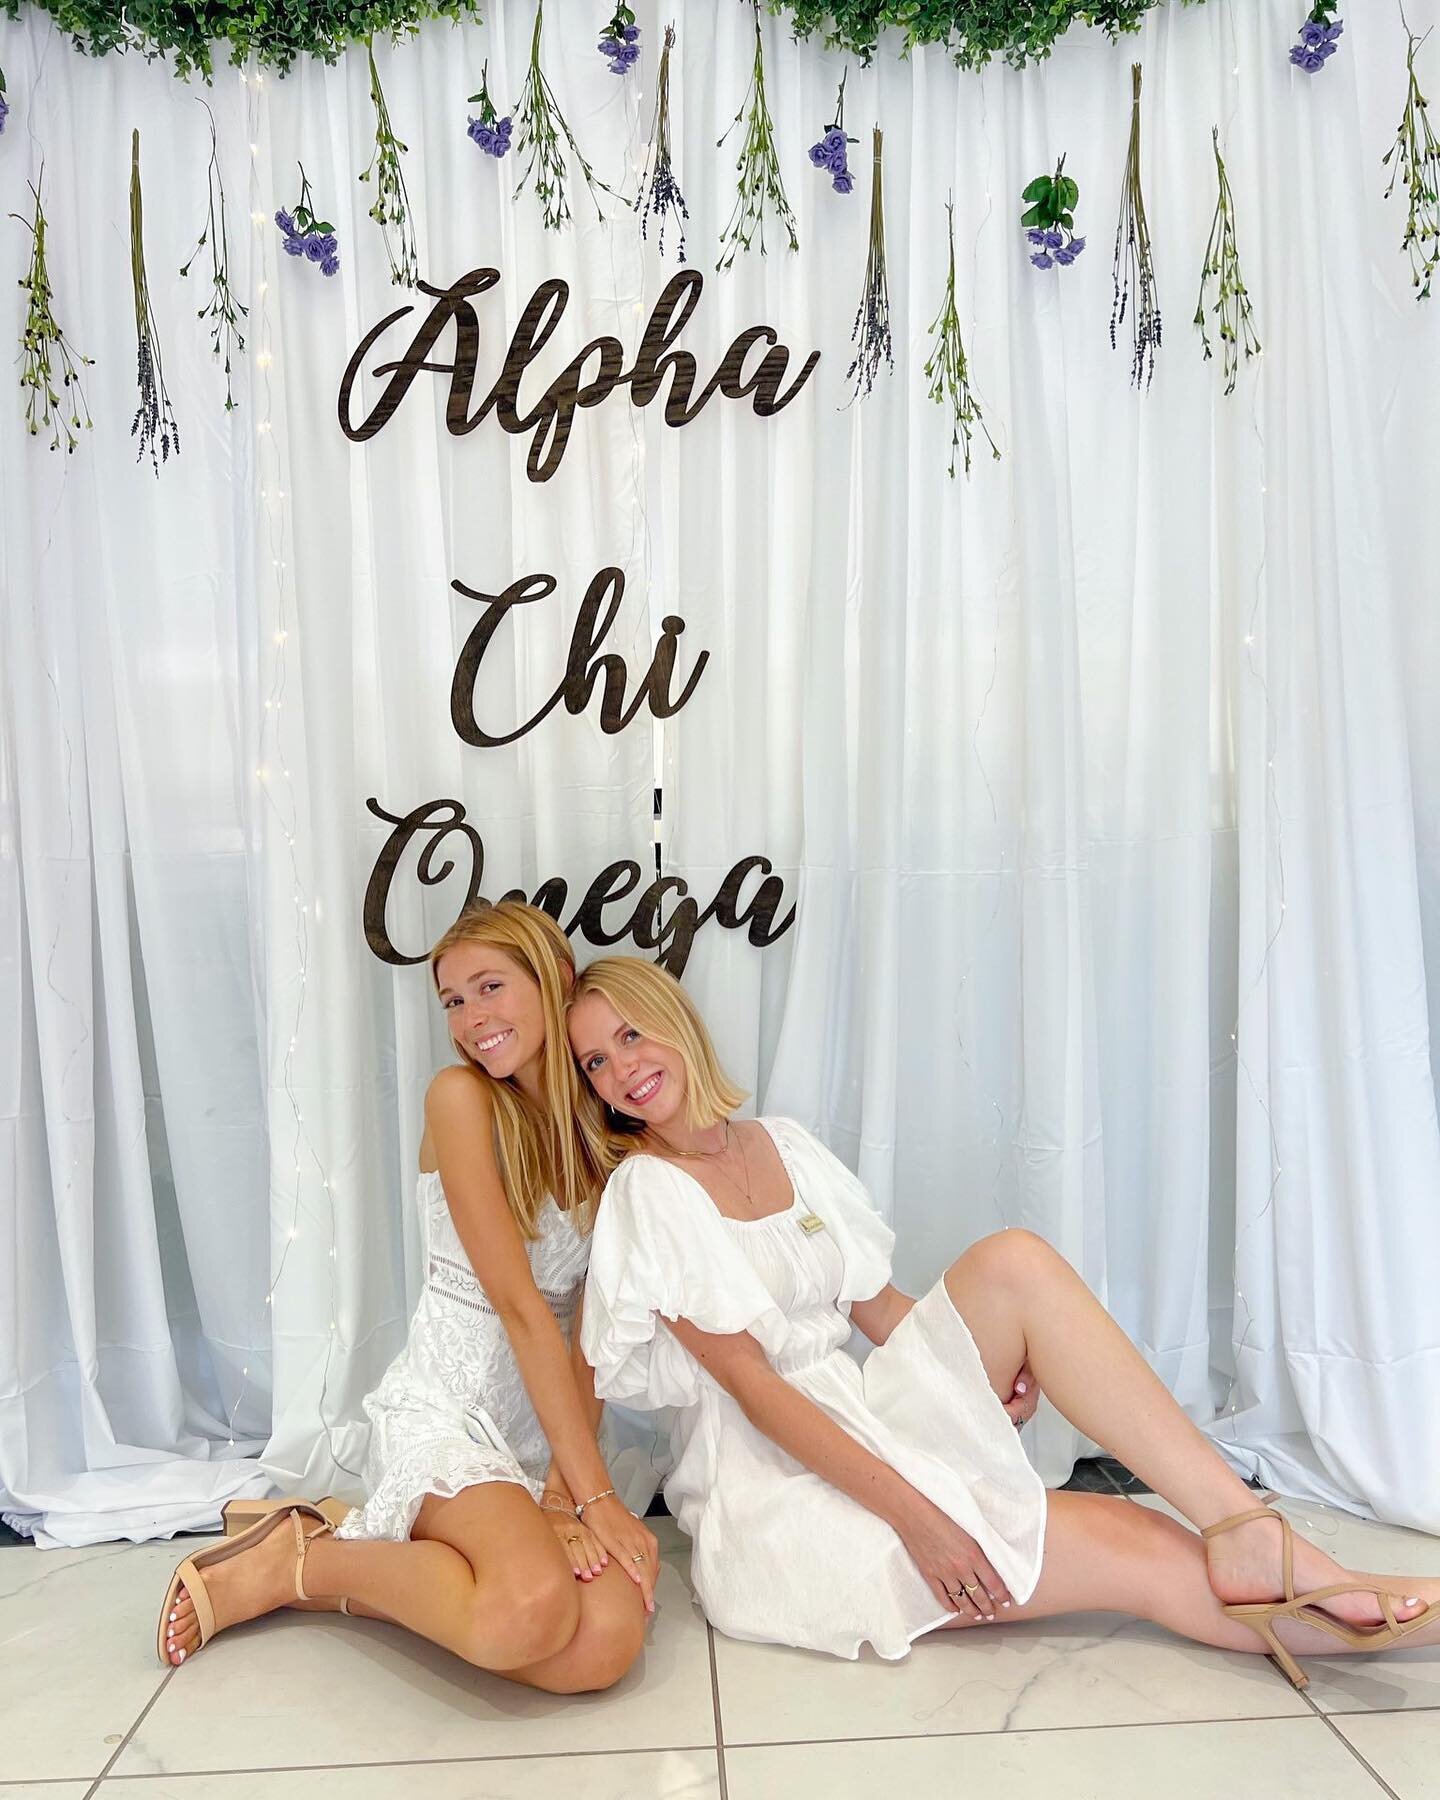 Round 2 in the books 💟 We had such an amazing time meeting everyone over the past two days and showing how special our philanthropy is to us. We can&rsquo;t wait to share more of our sisterhood tomorrow 🫶